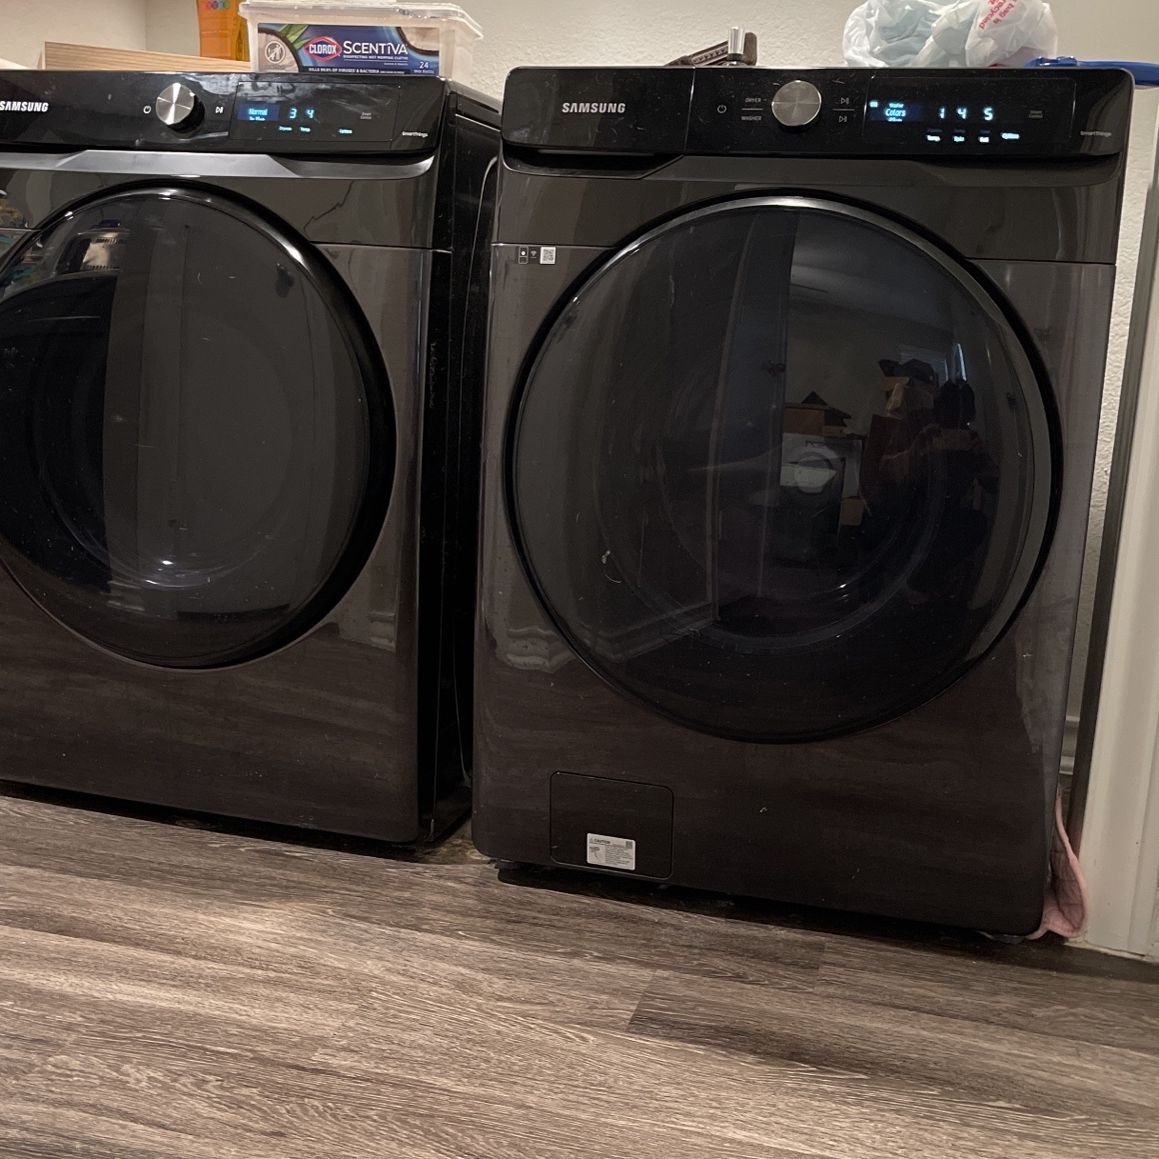 Samsung Washer & Dryer With AI Technology, 2yrs Old